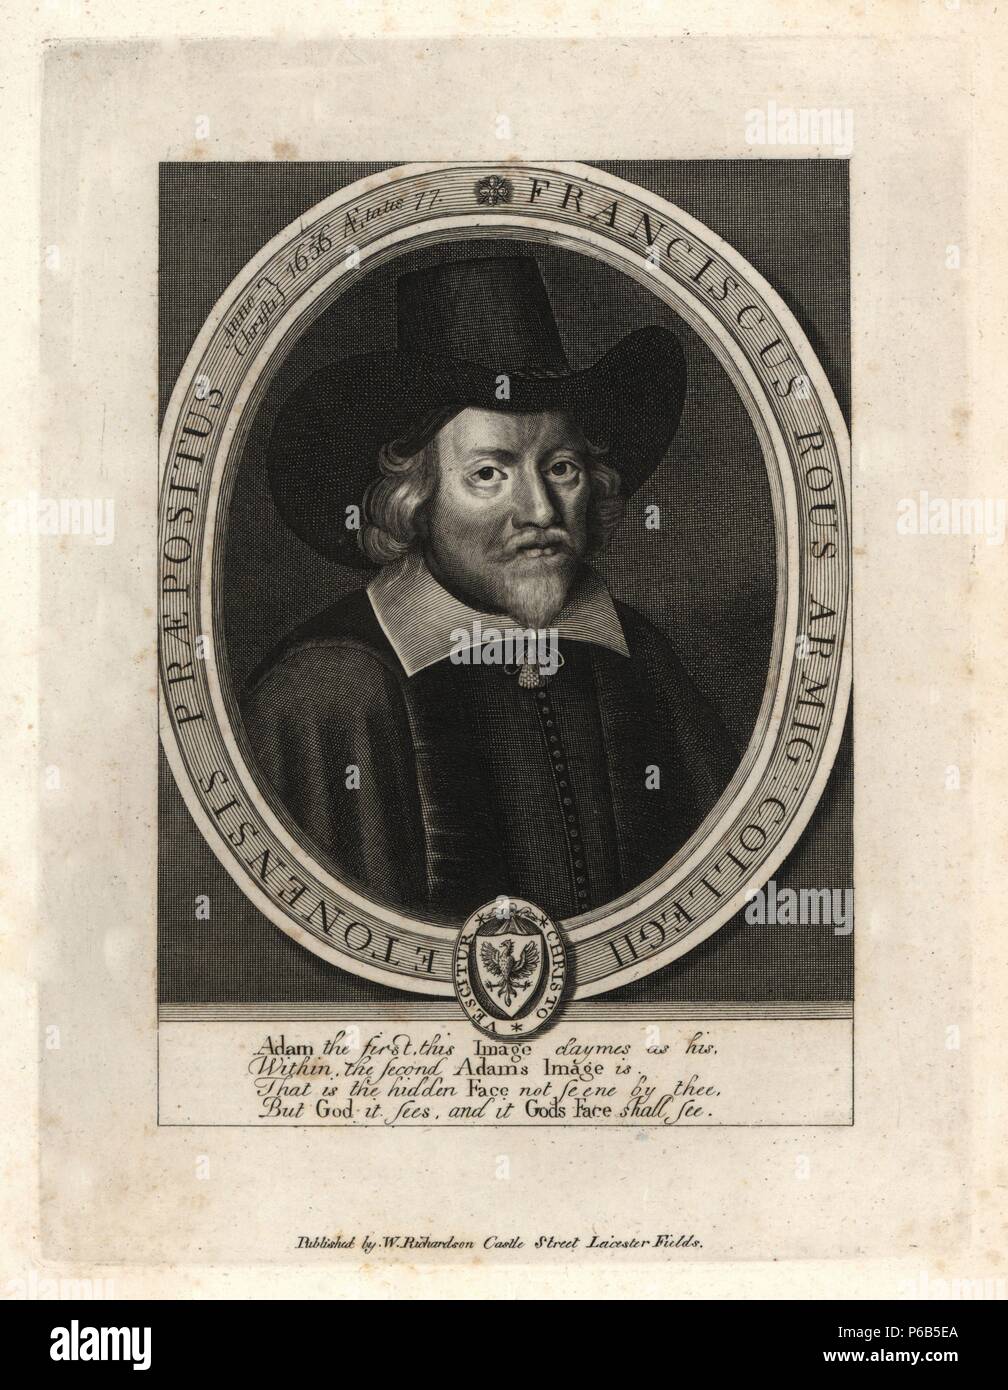 Francis Rous, Provost of Eton College, 1643. Died 1656, aged 77. From a scarce portrait by W. Faithorne prefixed to his 'Works,' 1657. Copperplate engraving from Richardson's 'Portraits illustrating Granger's Biographical History of England,' London, 1792–1812. Published by William Richardson, printseller, London. James Granger (1723–1776) was an English clergyman, biographer, and print collector. Stock Photo